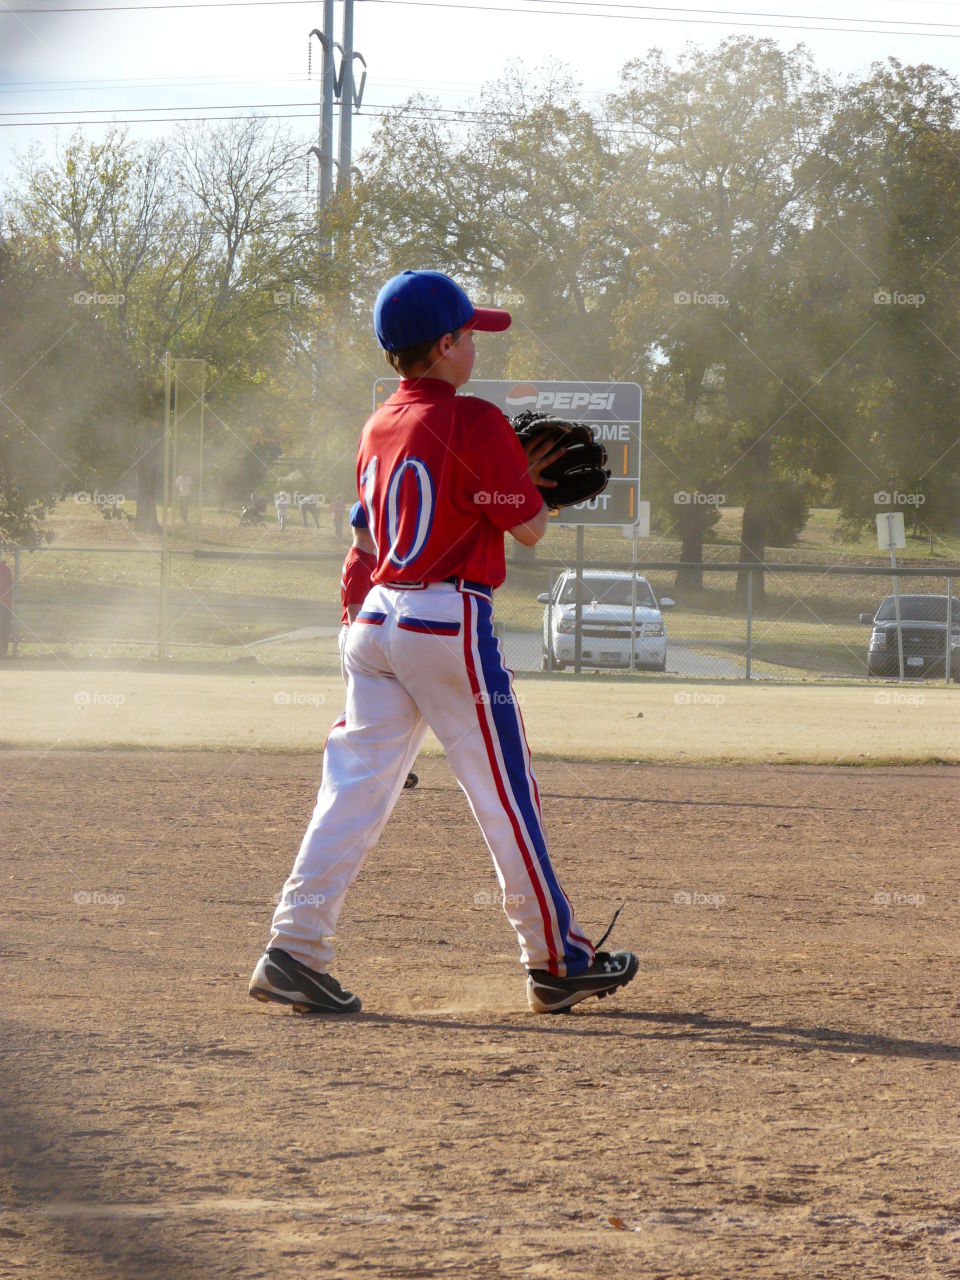 10 year old playing baseball. 10 year old playing baseball. Dreaming of making it to the big leagues.